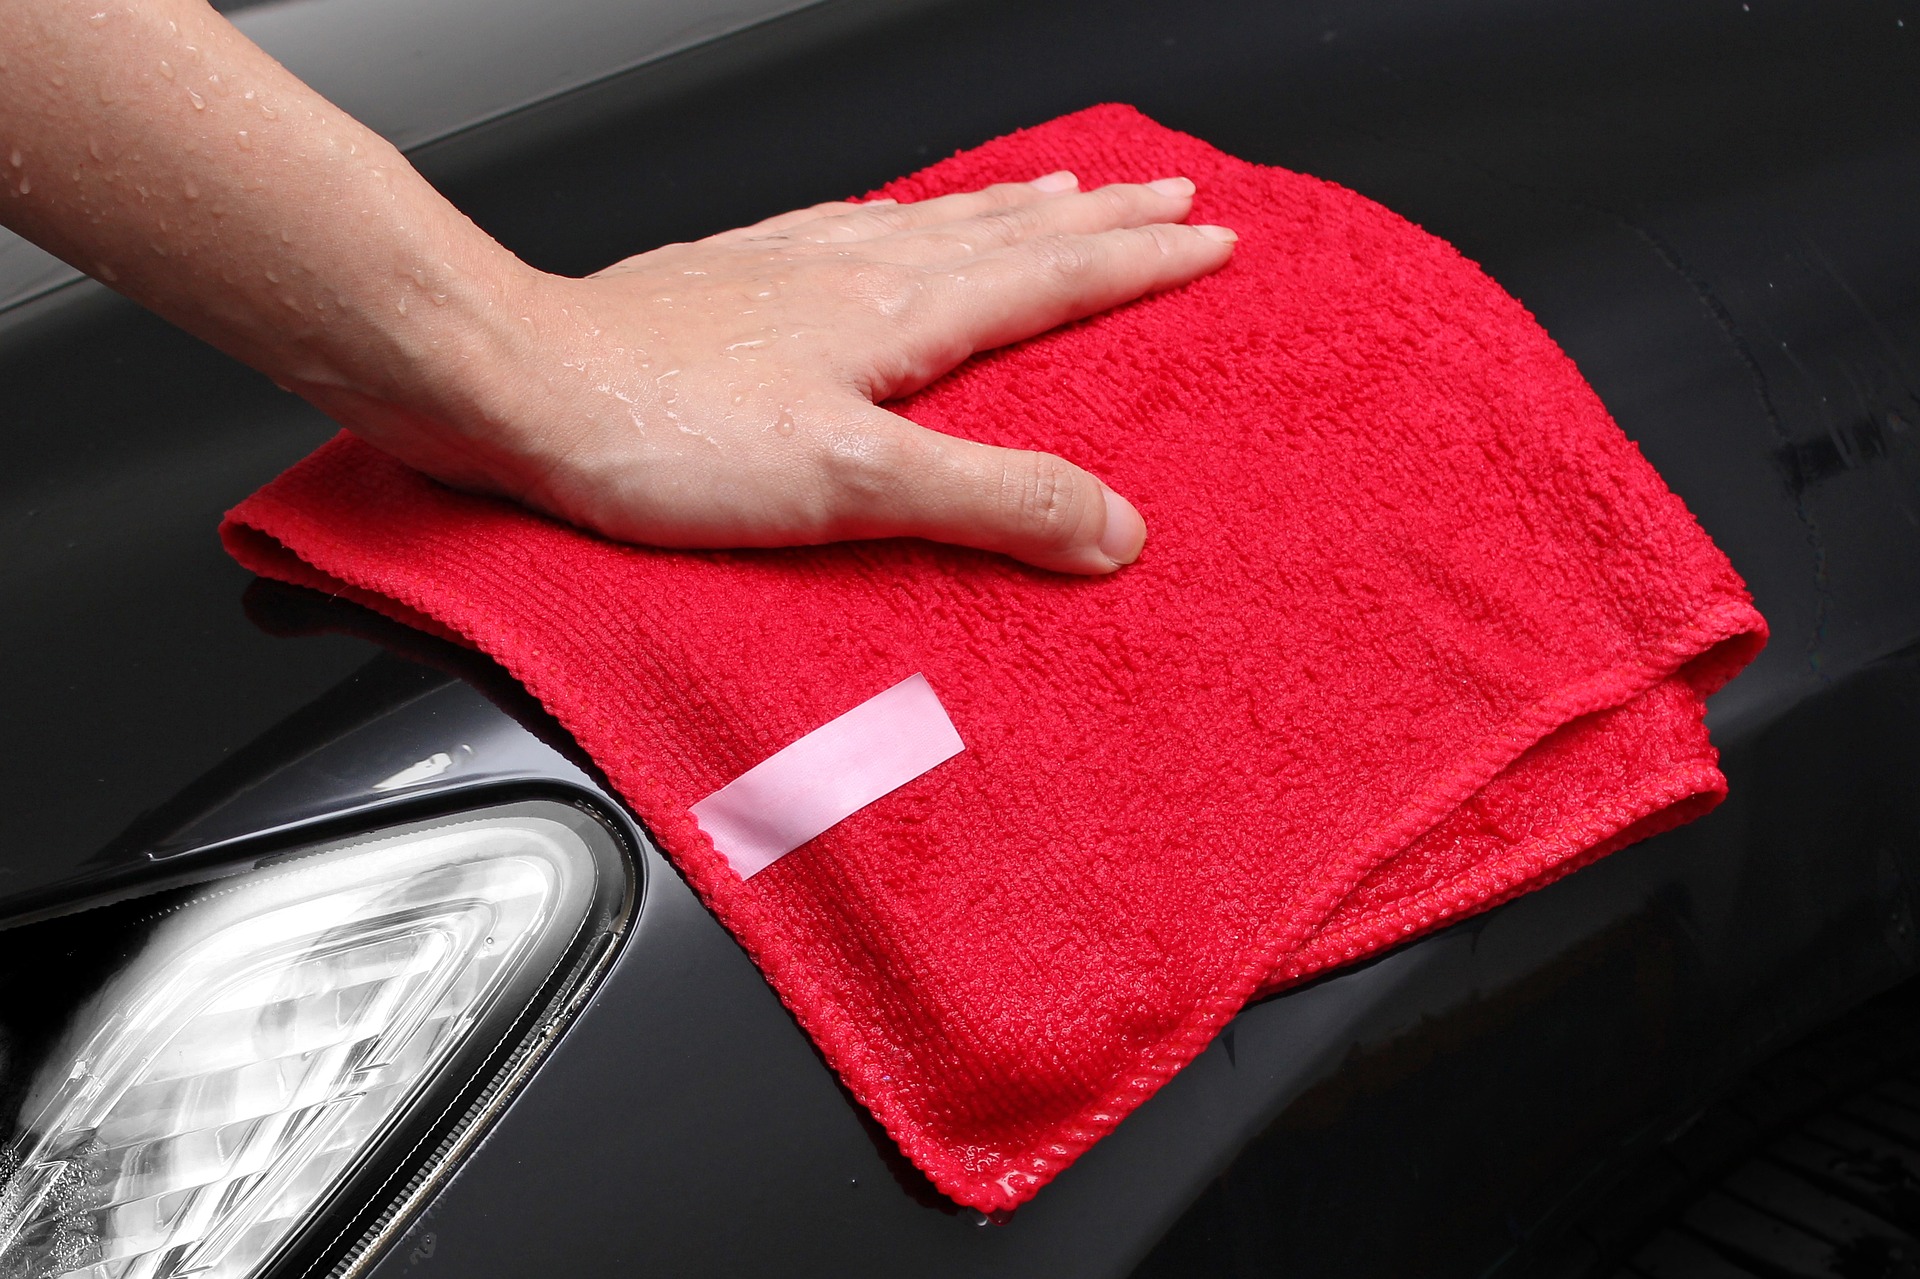 Red microfiber cloth drying Deluxe Wash car wash package from Fast Auto Wash of Sioux Falls, SD.